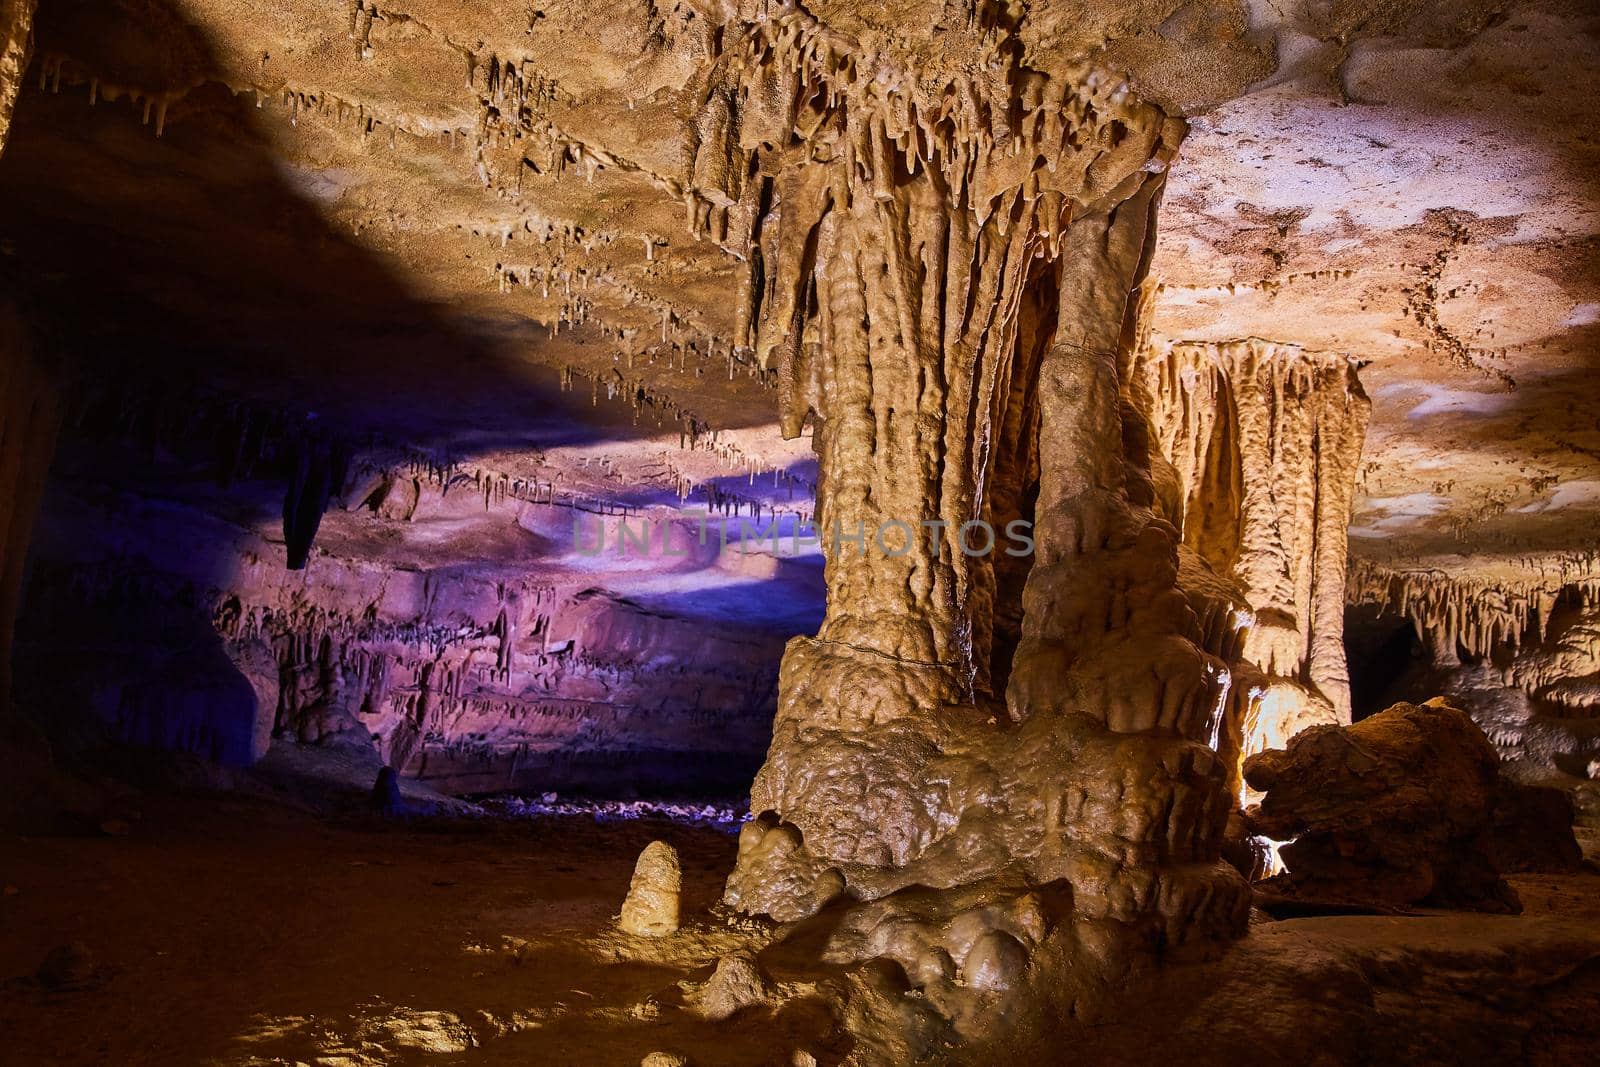 Large rock formations in cave with waxy surface and glow of purple in the background by njproductions